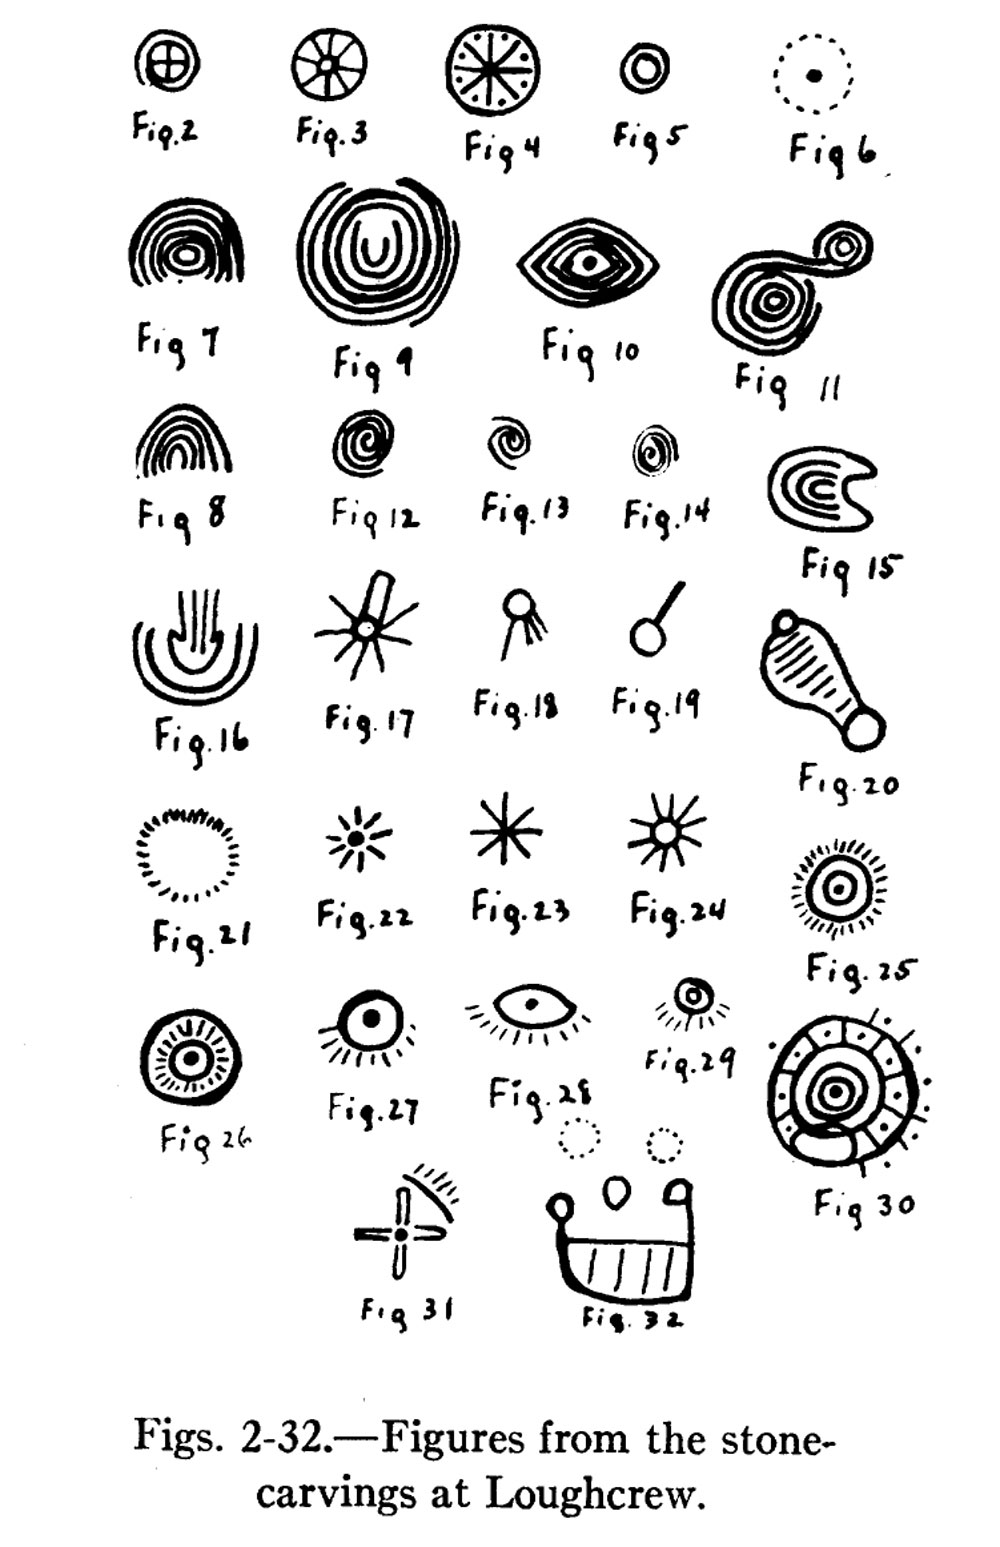 The range of symbols encountered at Loughcrew by George Blom.